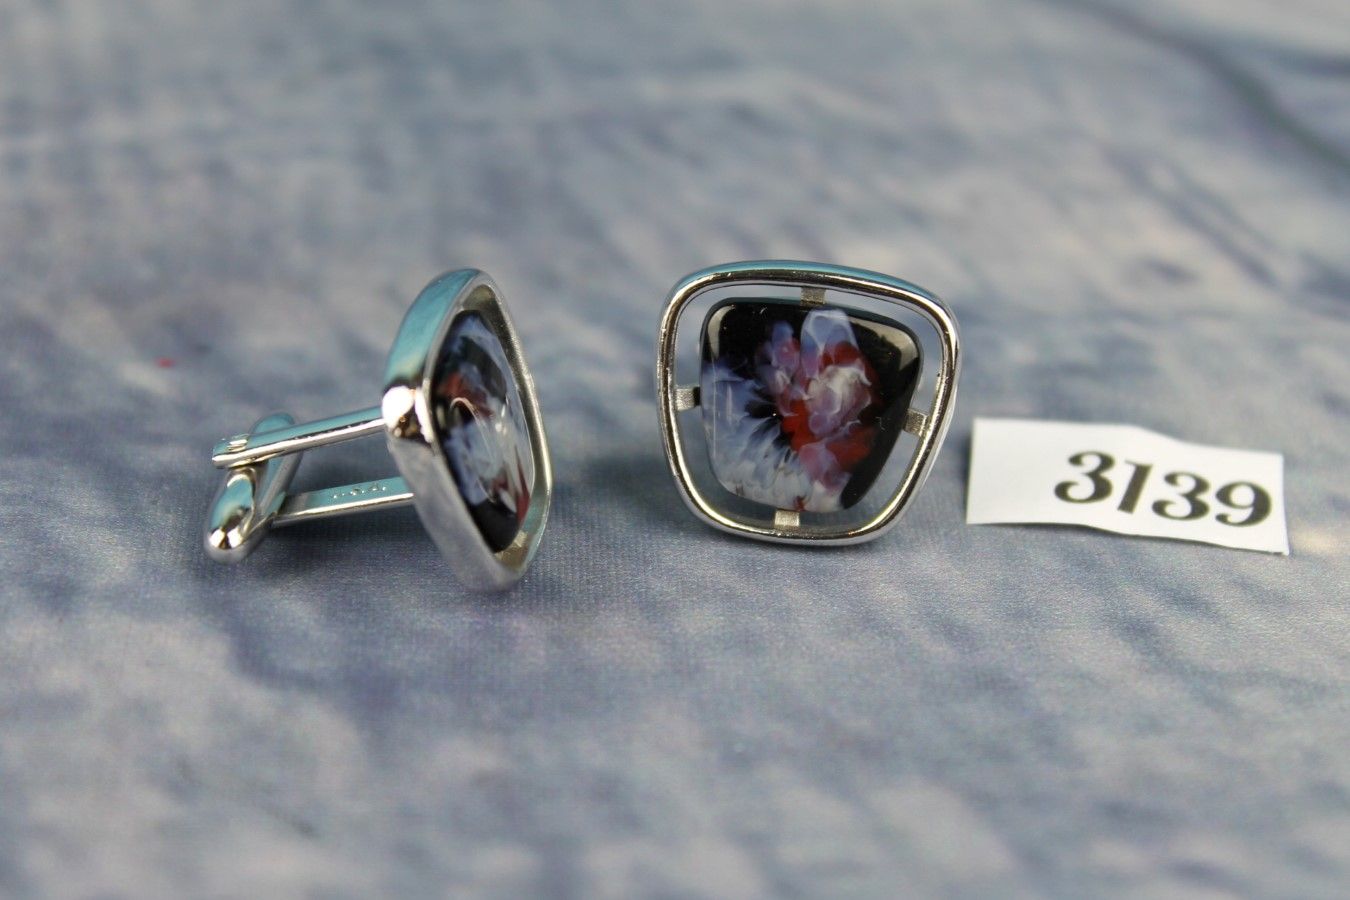 Vintage HICKOK Silver Metal Cufflinks Colourful Red Blue Black Stone